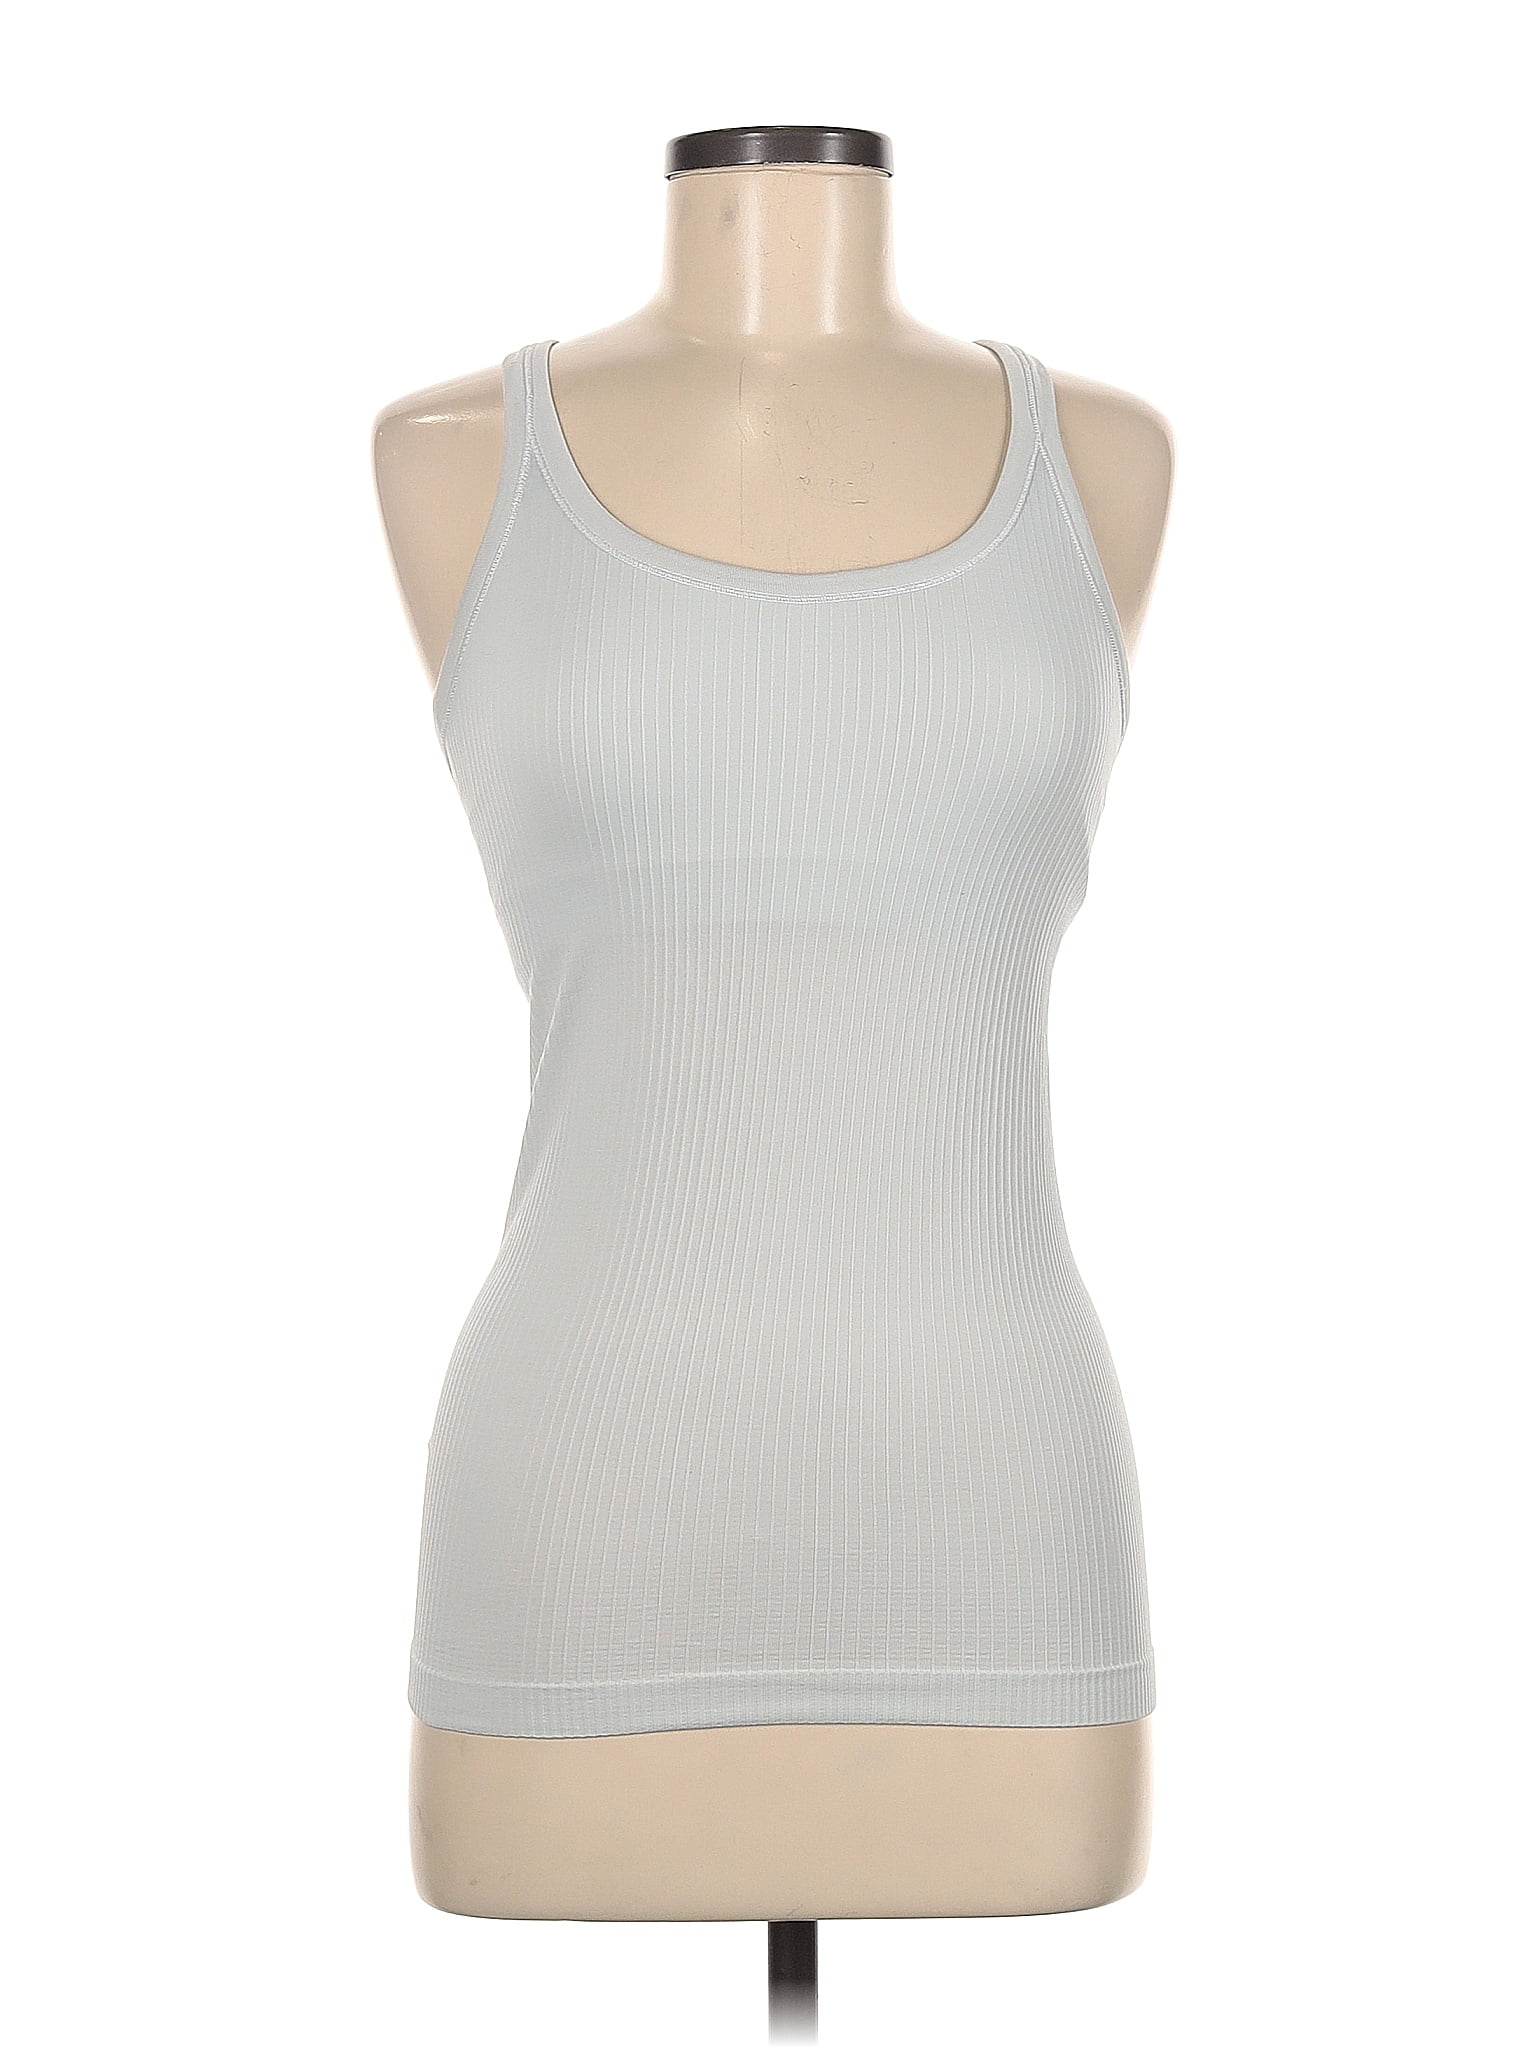 Lululemon Athletica Color Block Gray Silver Active Tank Size 0 - 53% off